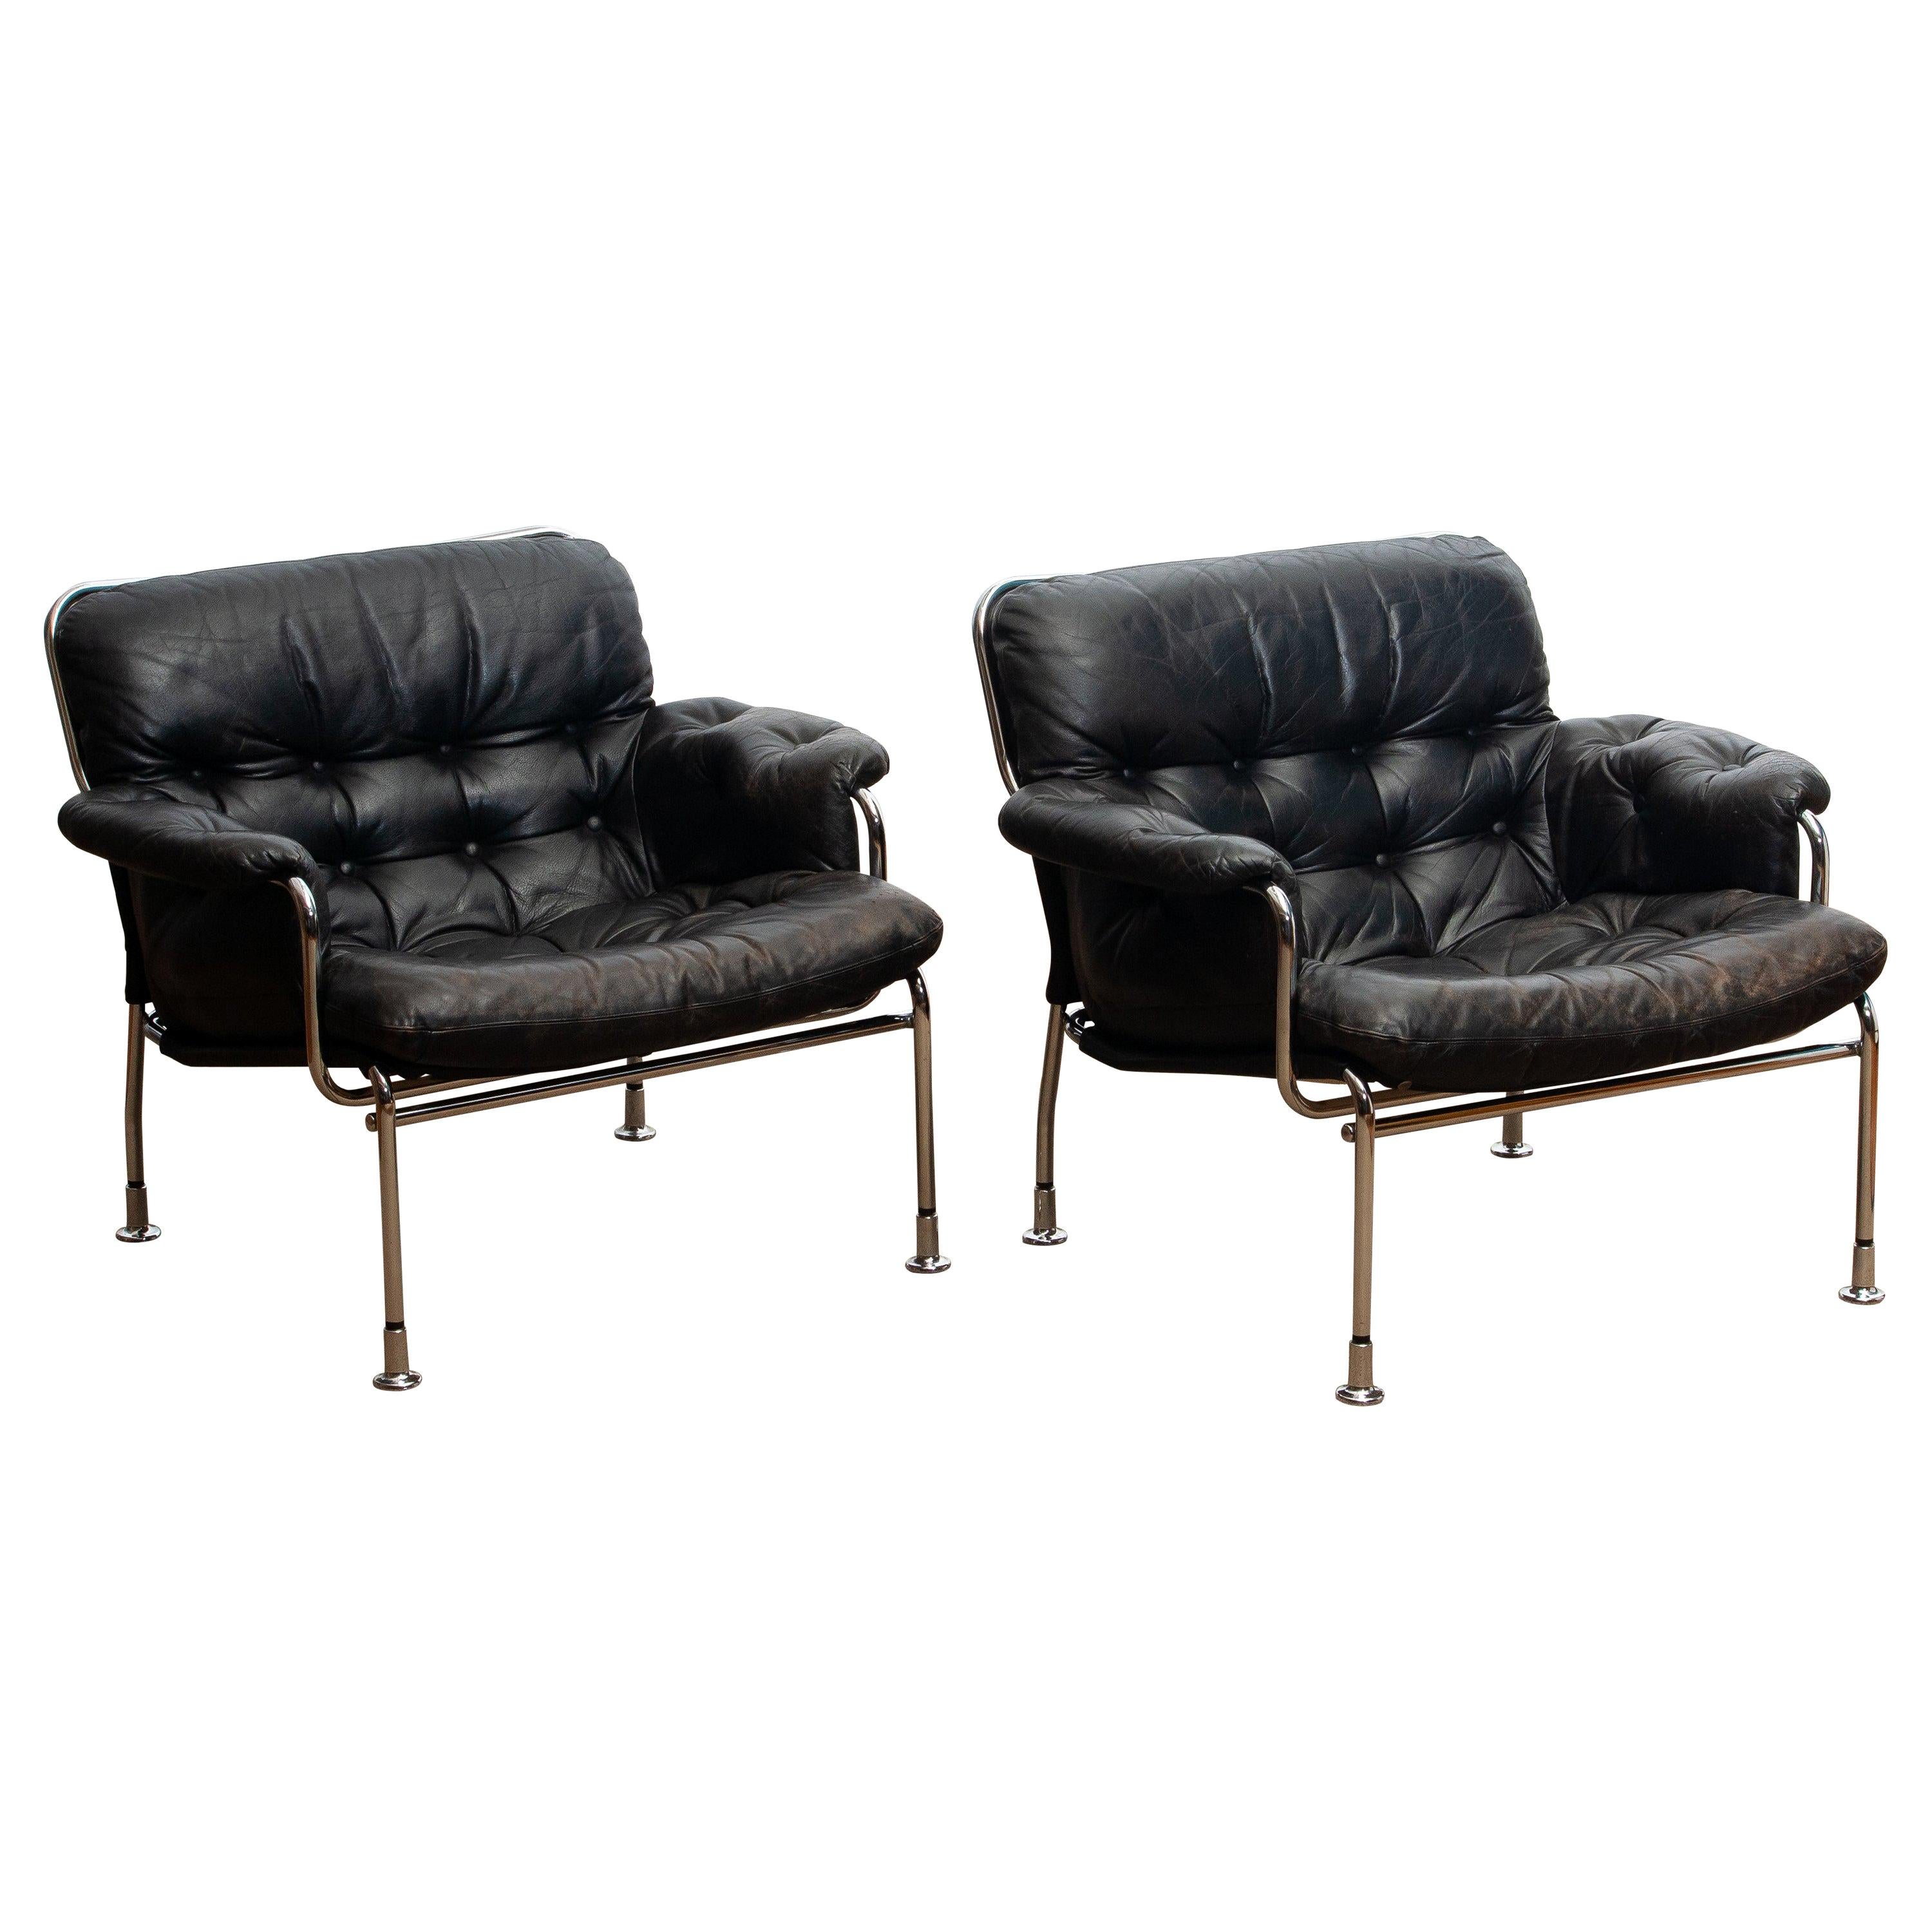 Beautiful set of two lounge / easy chairs in aged black leather and chrome designed by Pethrus Lindlöfs for A.B. Lindlöfs Möbler Lammhult, Sweden. Model Eva.
The aged leather on both chairs gives these chairs the typical vintage character. The